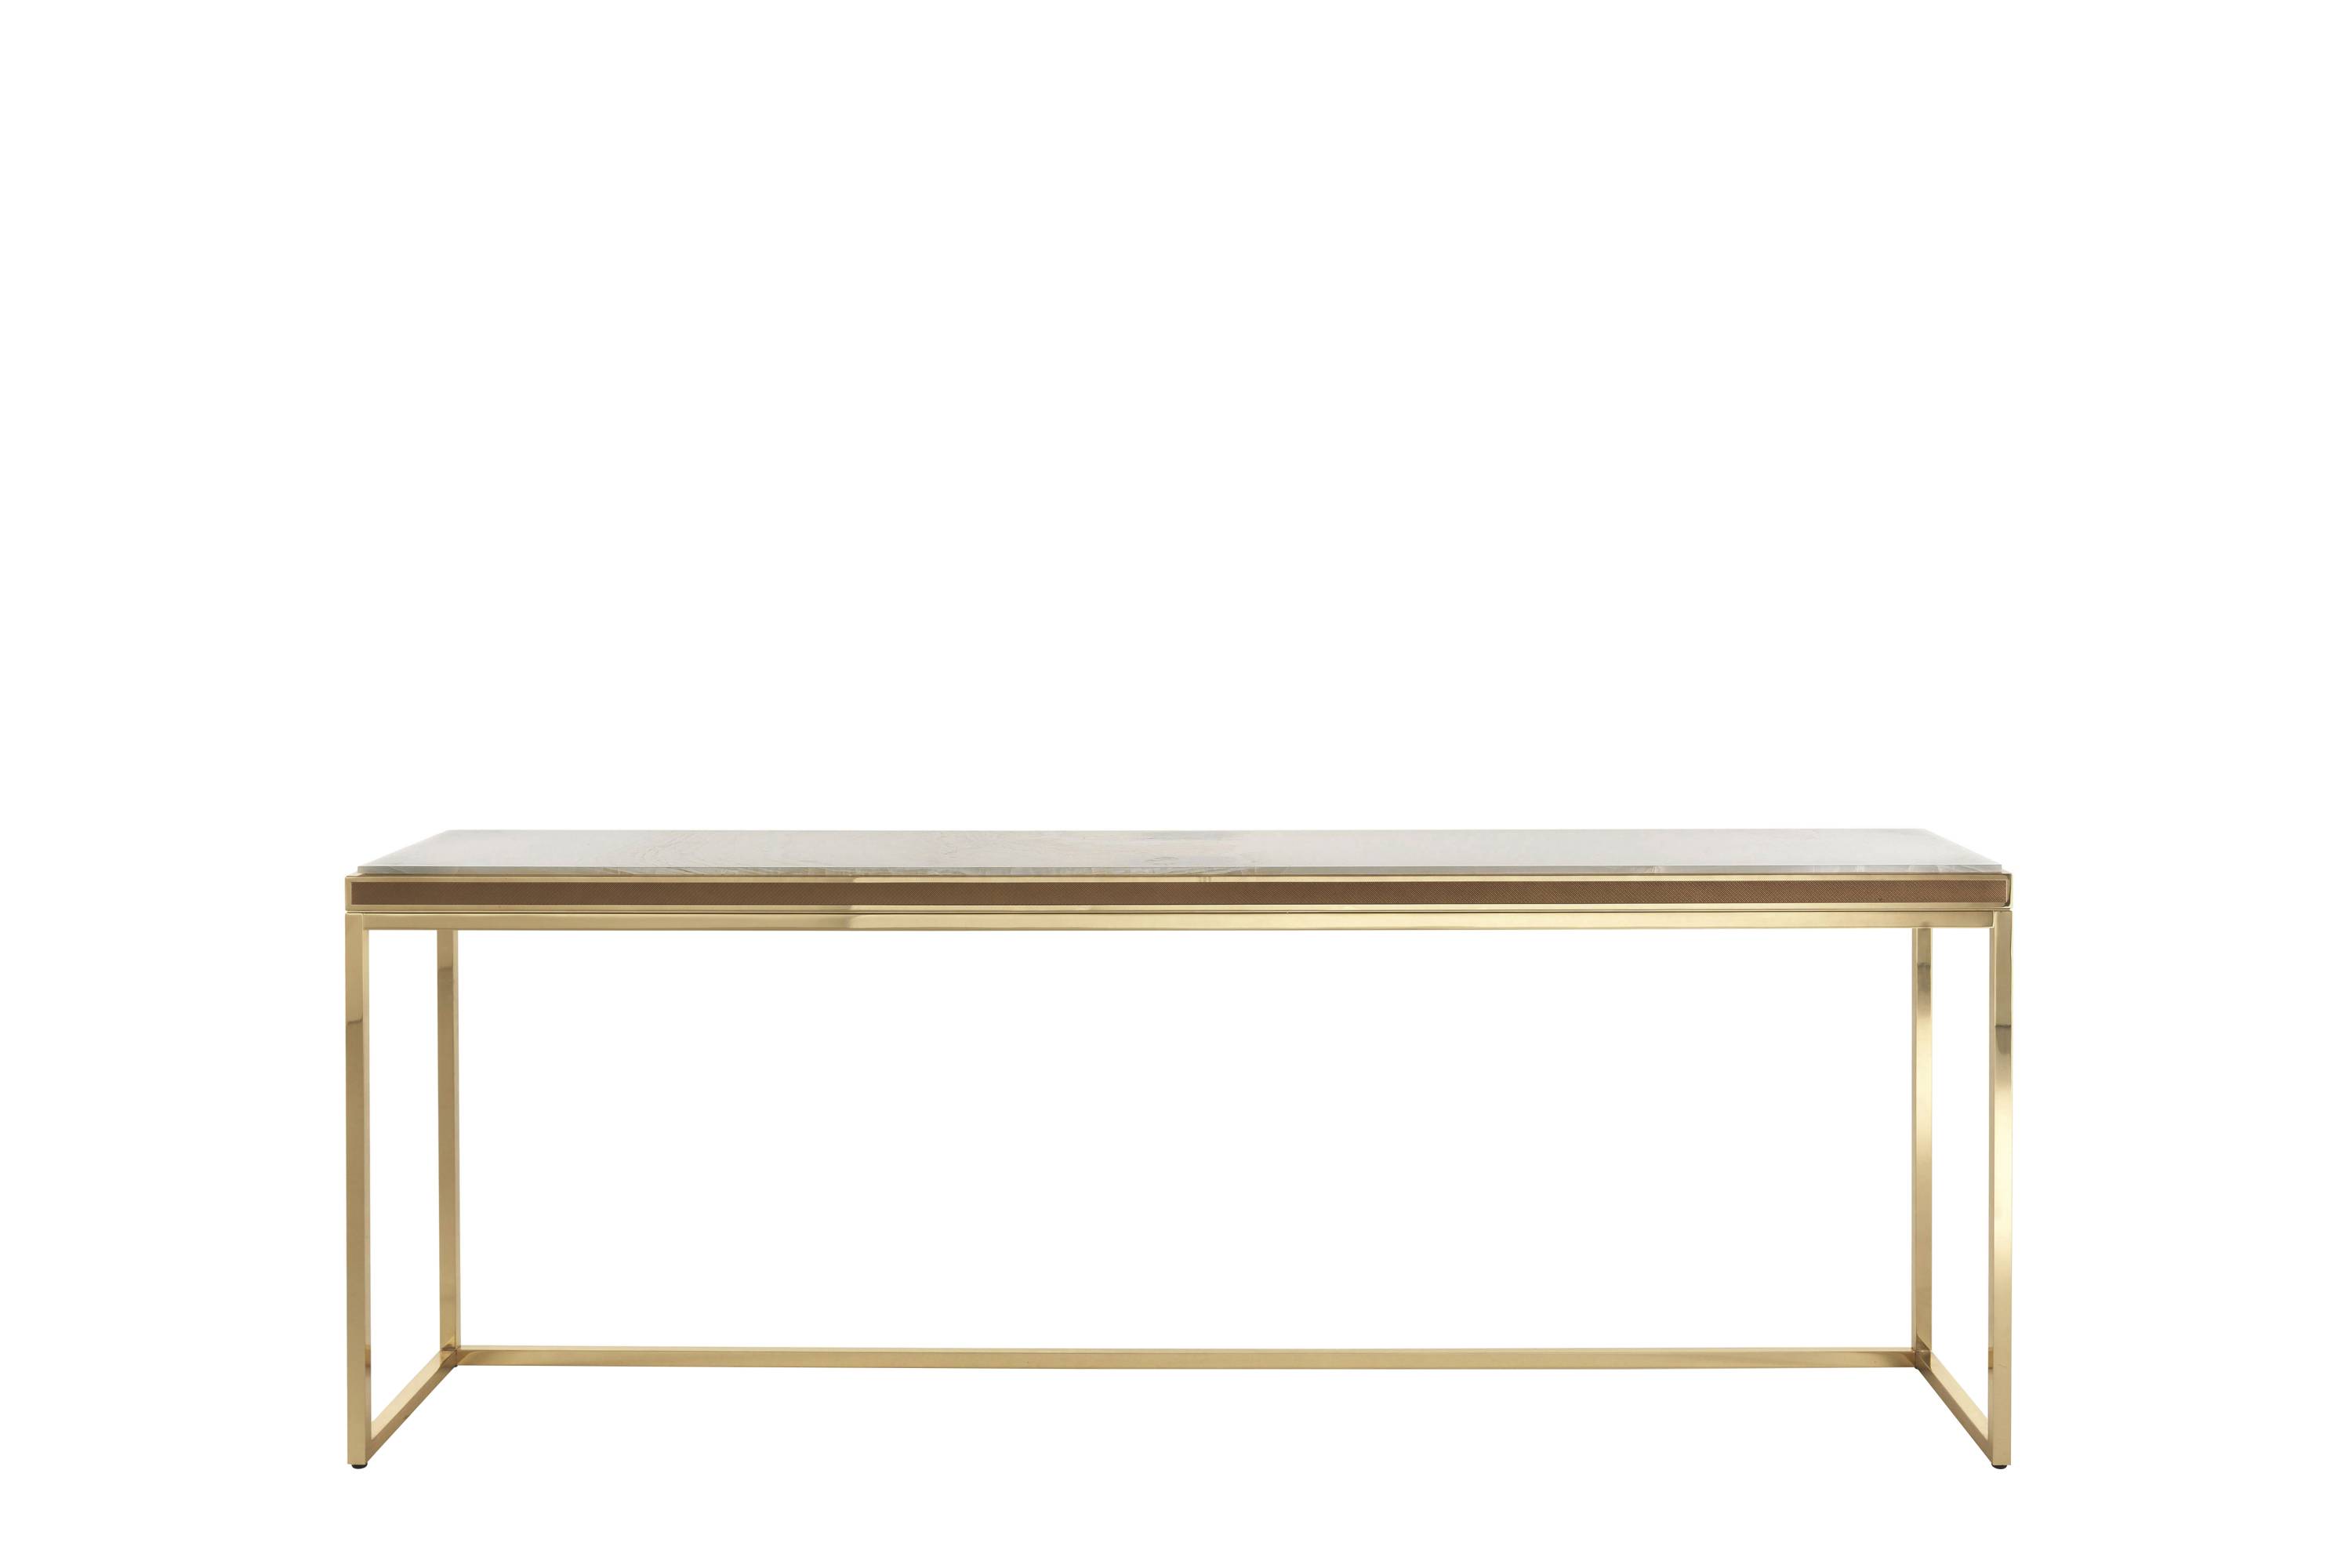 DEDALUS console - A luxury experience with the Savoir-Faire collection and its classic luxurious furniture